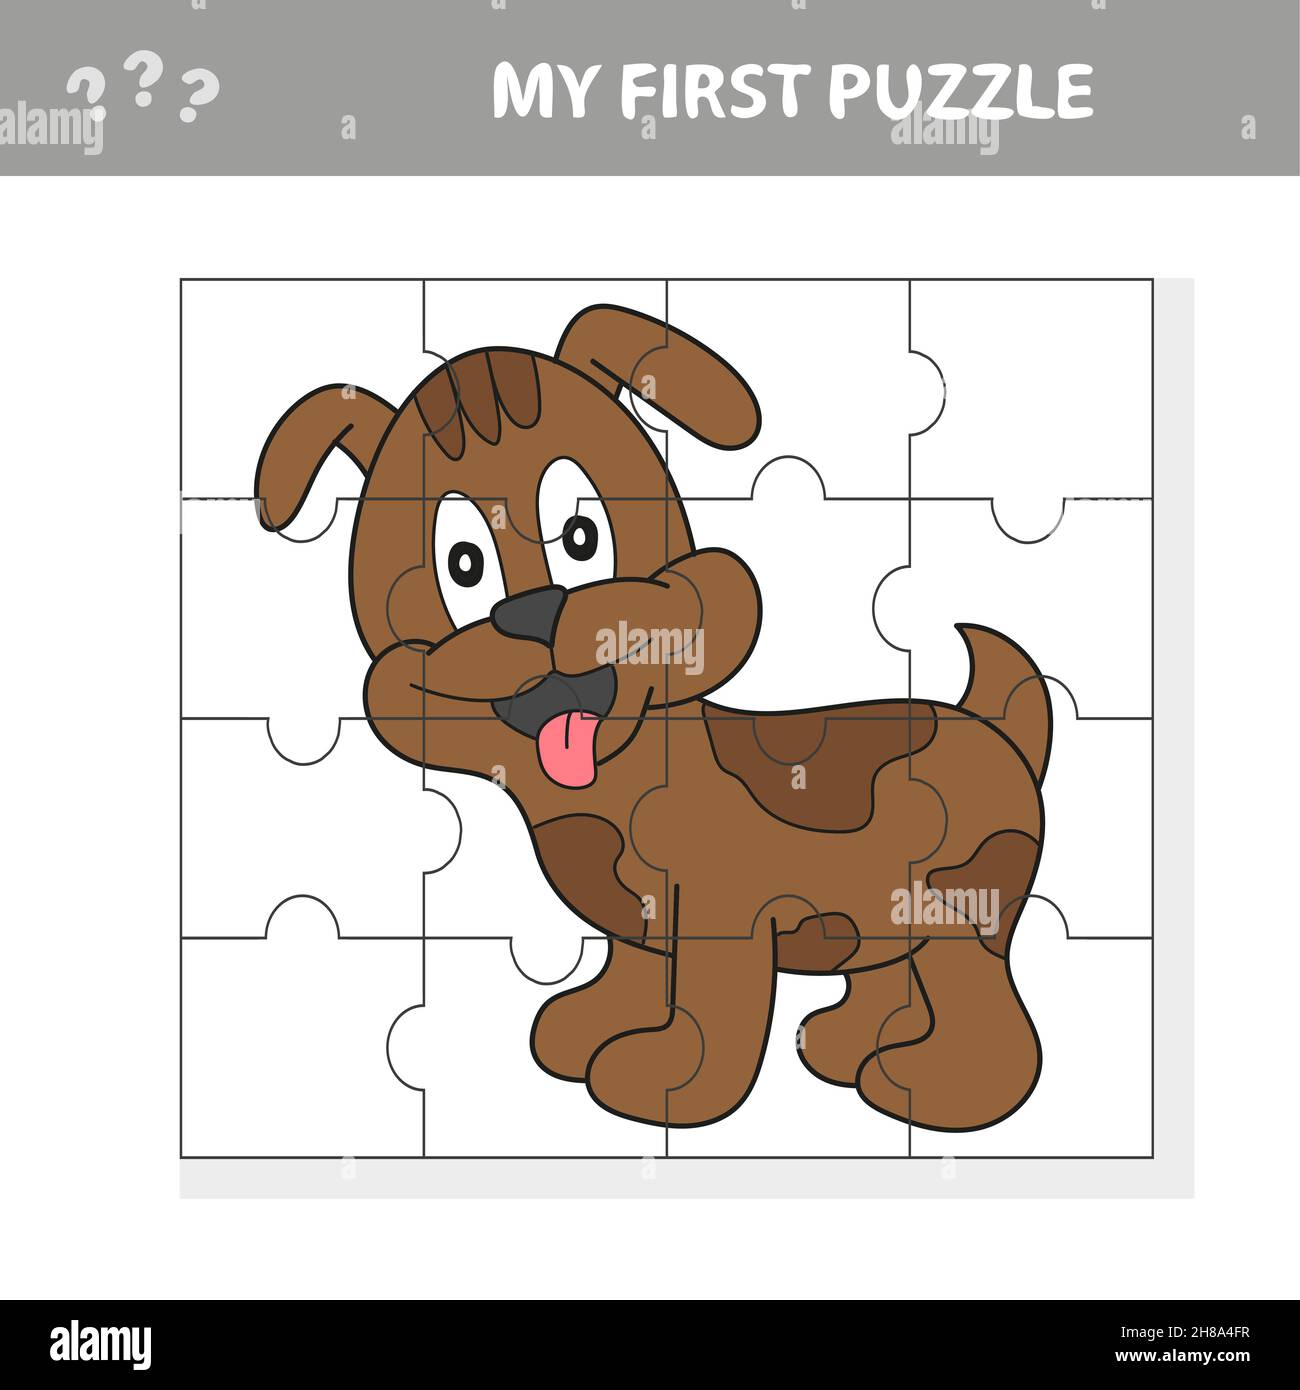 https://c8.alamy.com/comp/2H8A4FR/cartoon-vector-illustration-of-educational-jigsaw-puzzle-game-for-children-with-funny-dog-character-my-first-puzzle-2H8A4FR.jpg